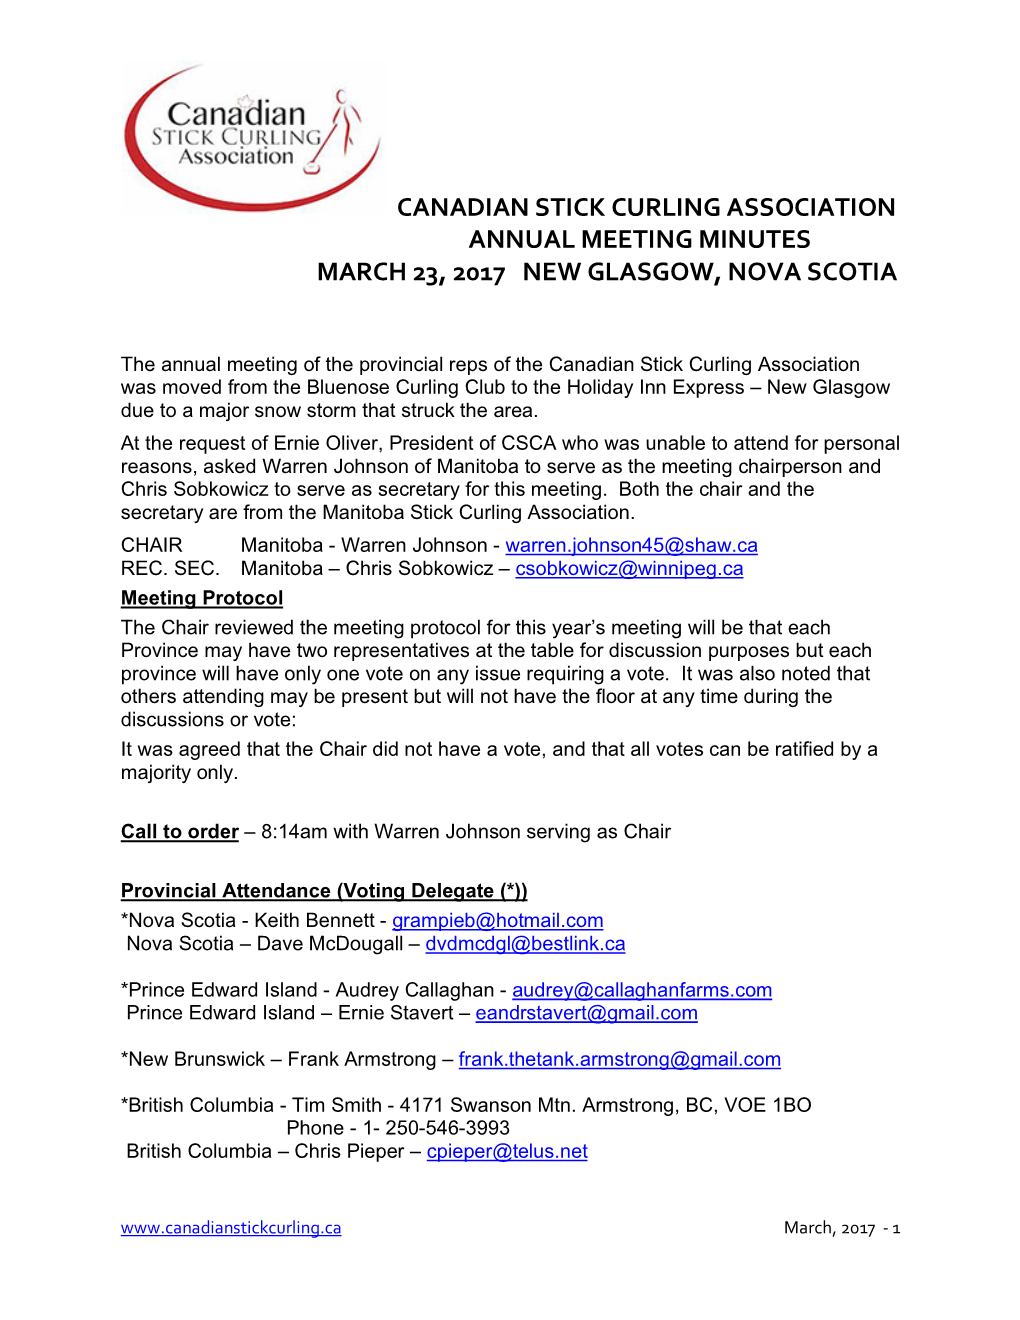 Canadian Stick Curling Association Annual Meeting Minutes March 23, 2017 New Glasgow, Nova Scotia